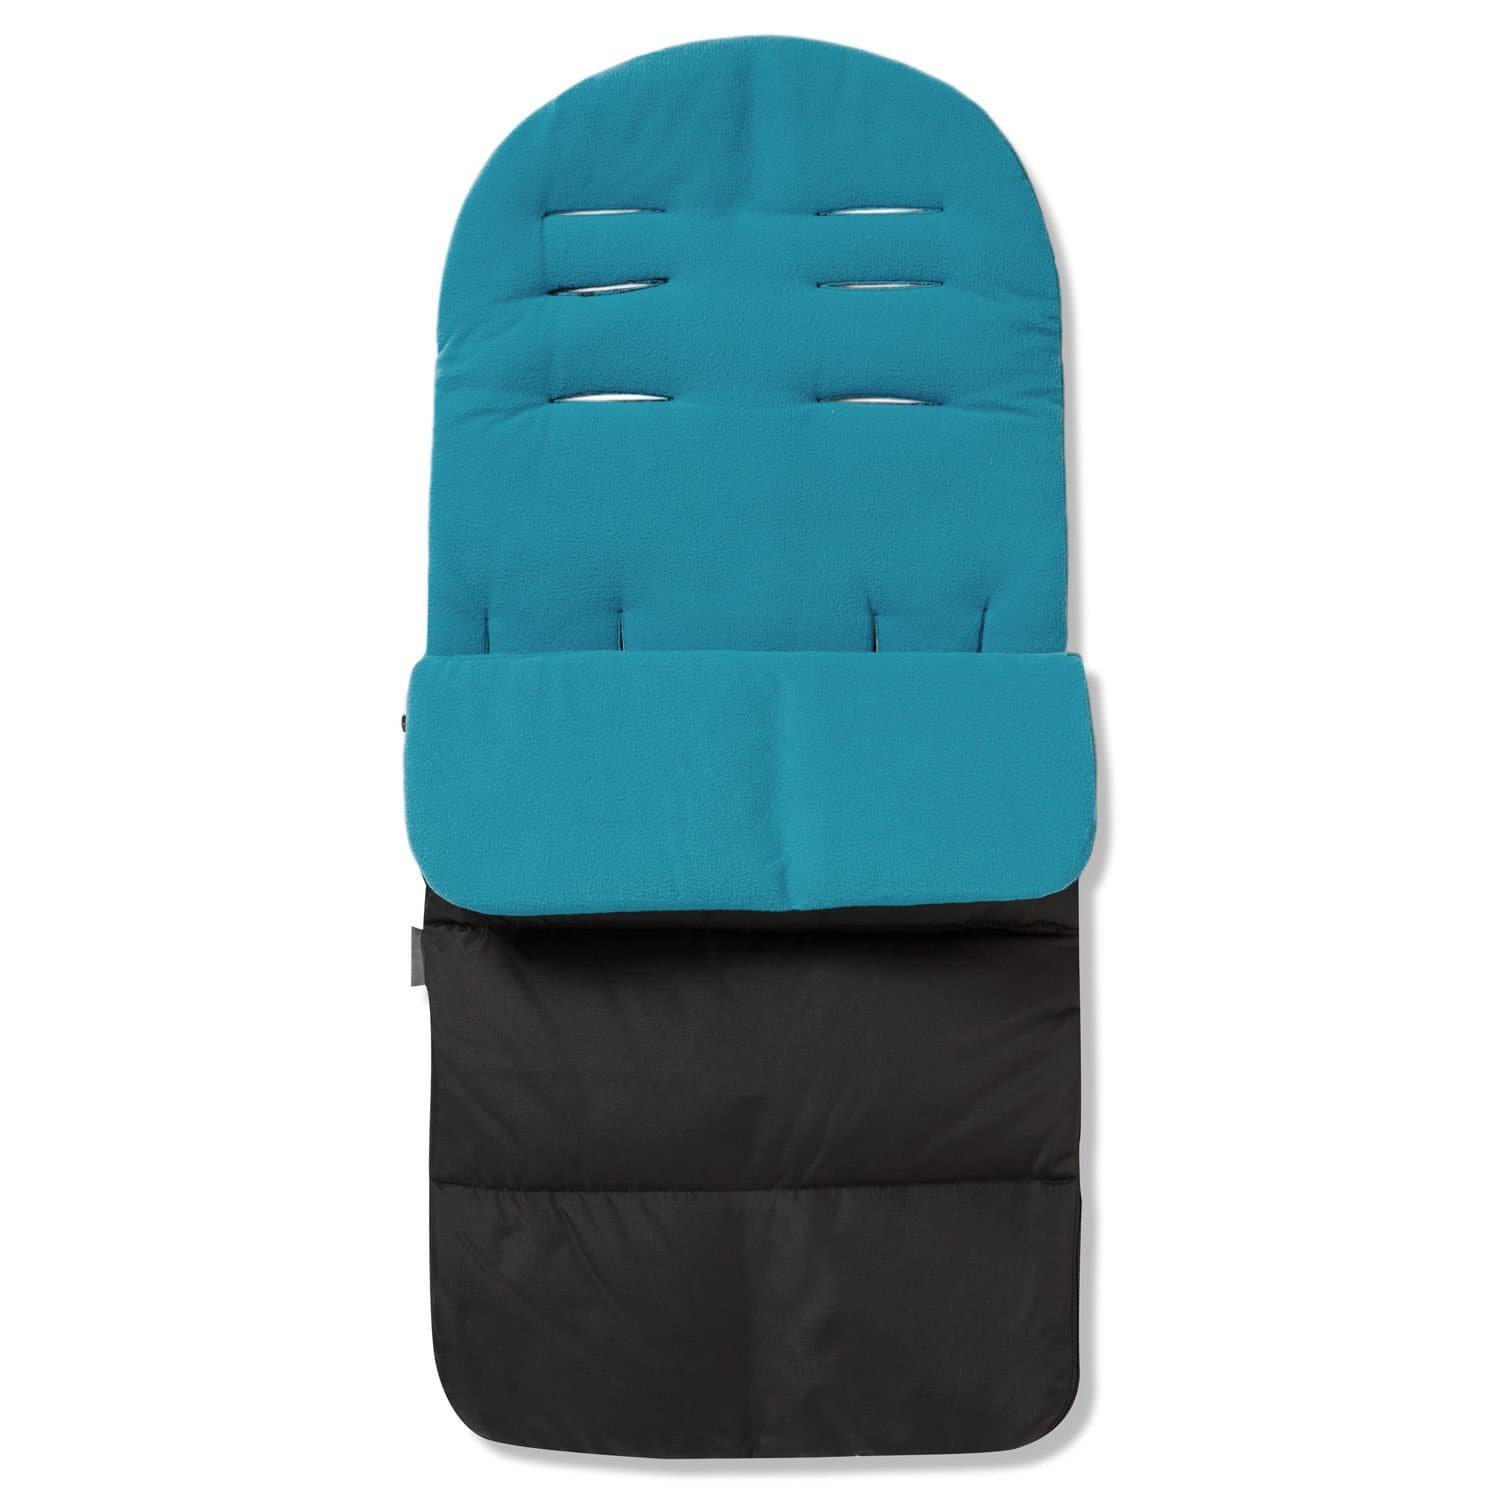 Premium Footmuff / Cosy Toes Compatible with Safety 1st - Ocean Blue / Fits All Models | For Your Little One